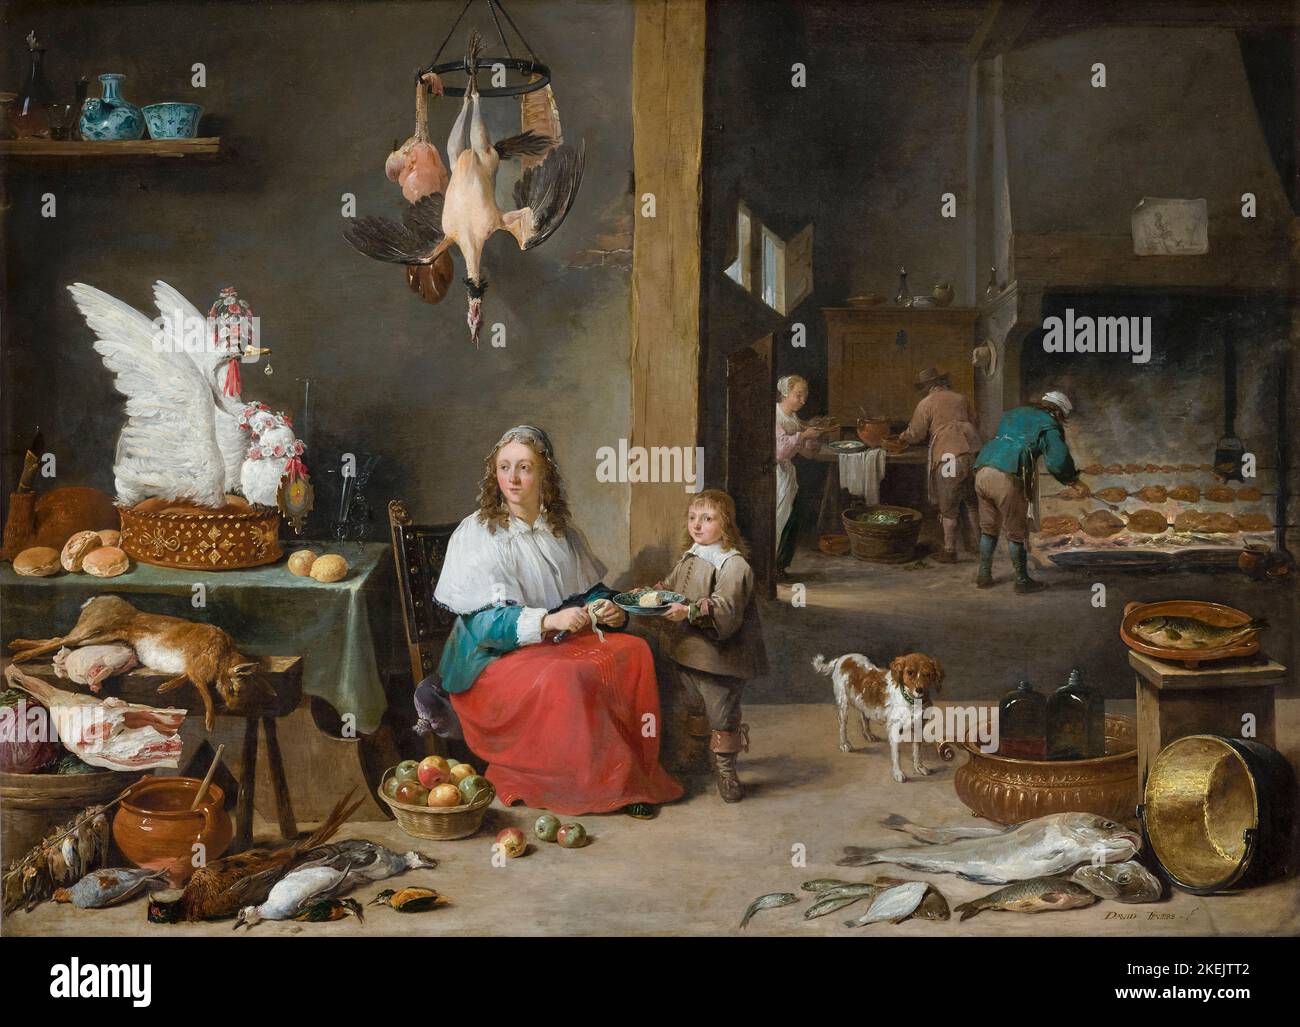 David Teniers the Younger painting, Kitchen Interior, oil on copper, 1644 Stock Photo